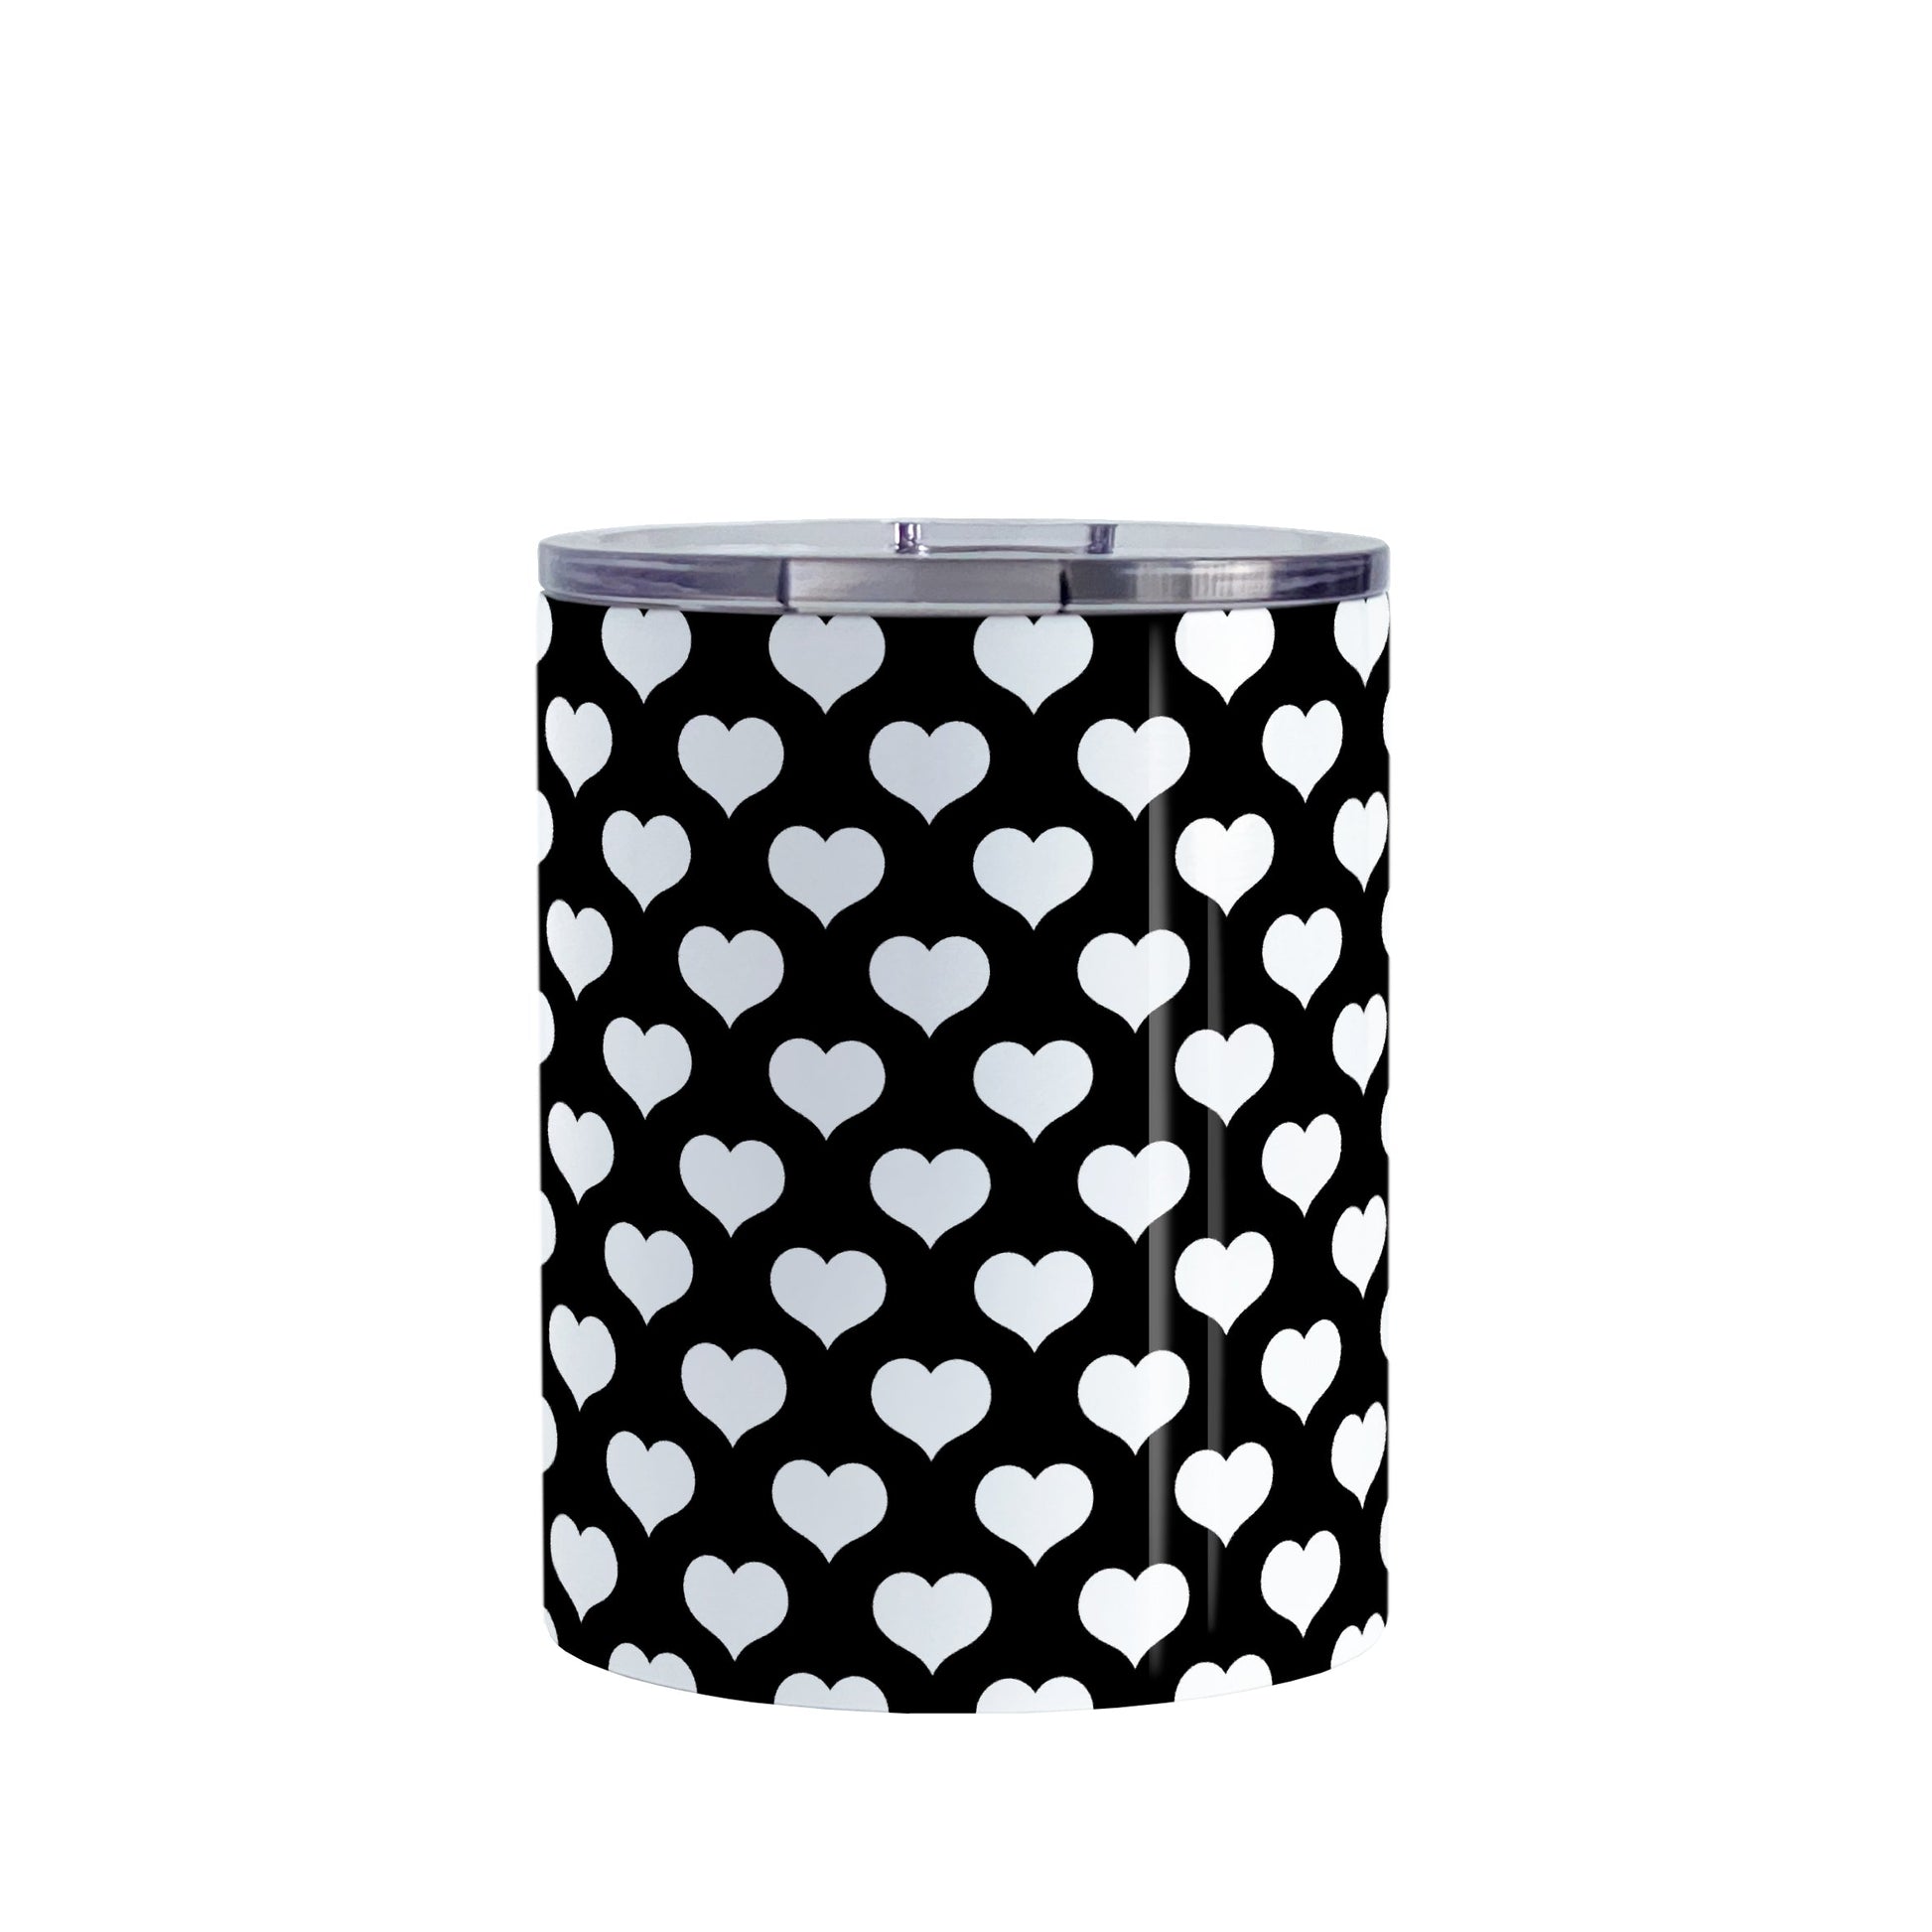 White Hearts Pattern Black Tumbler Cup (10oz, stainless steel insulated) at Amy's Coffee Mugs